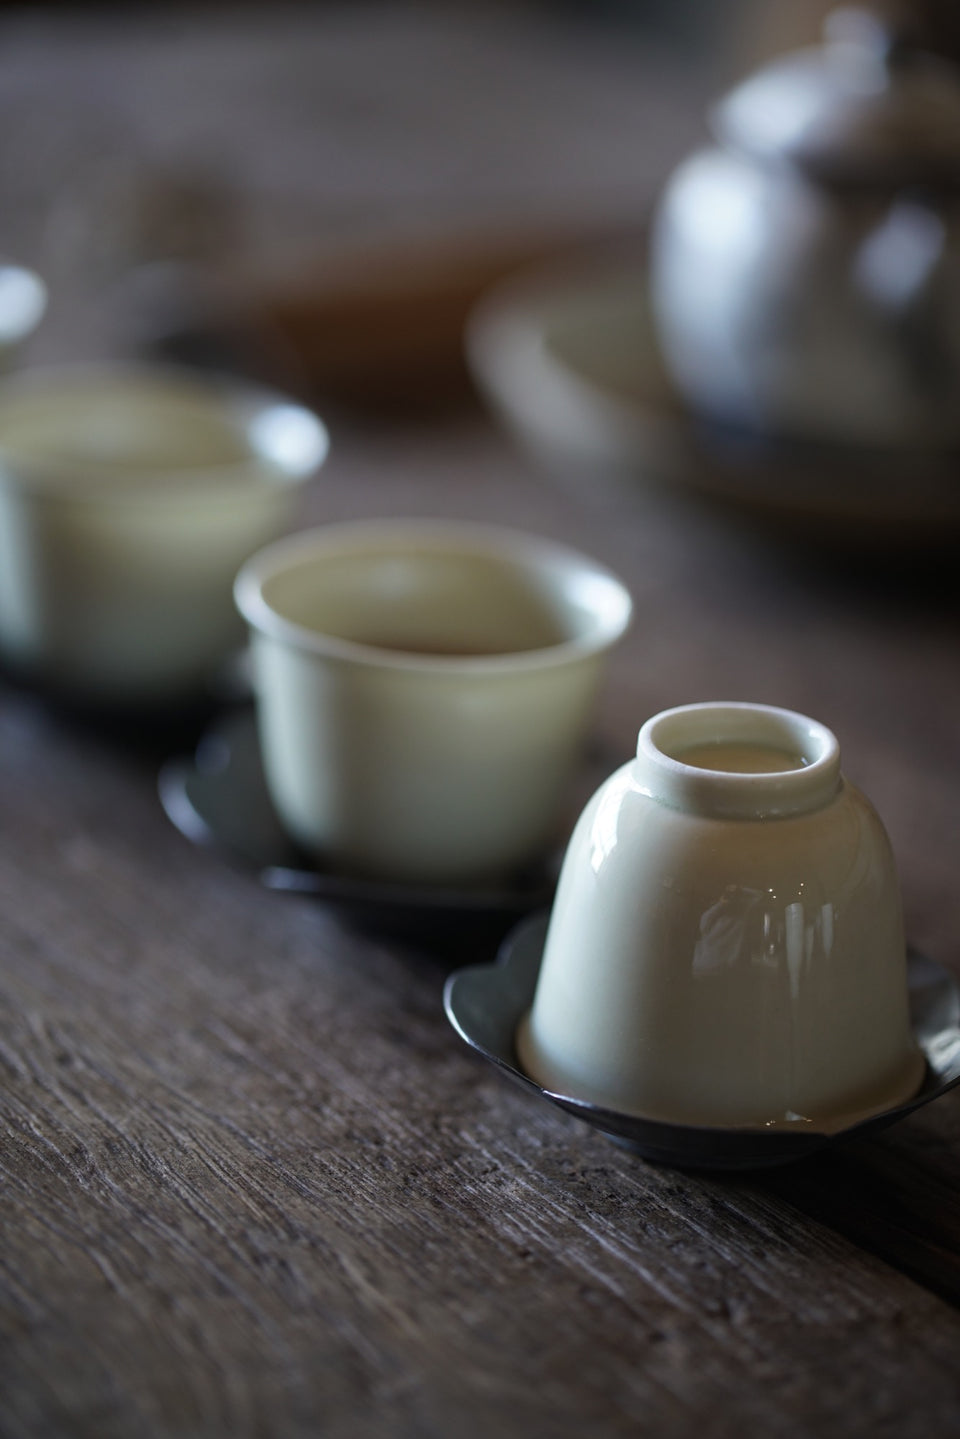 Gongfu teacups - off-white, multiple styles